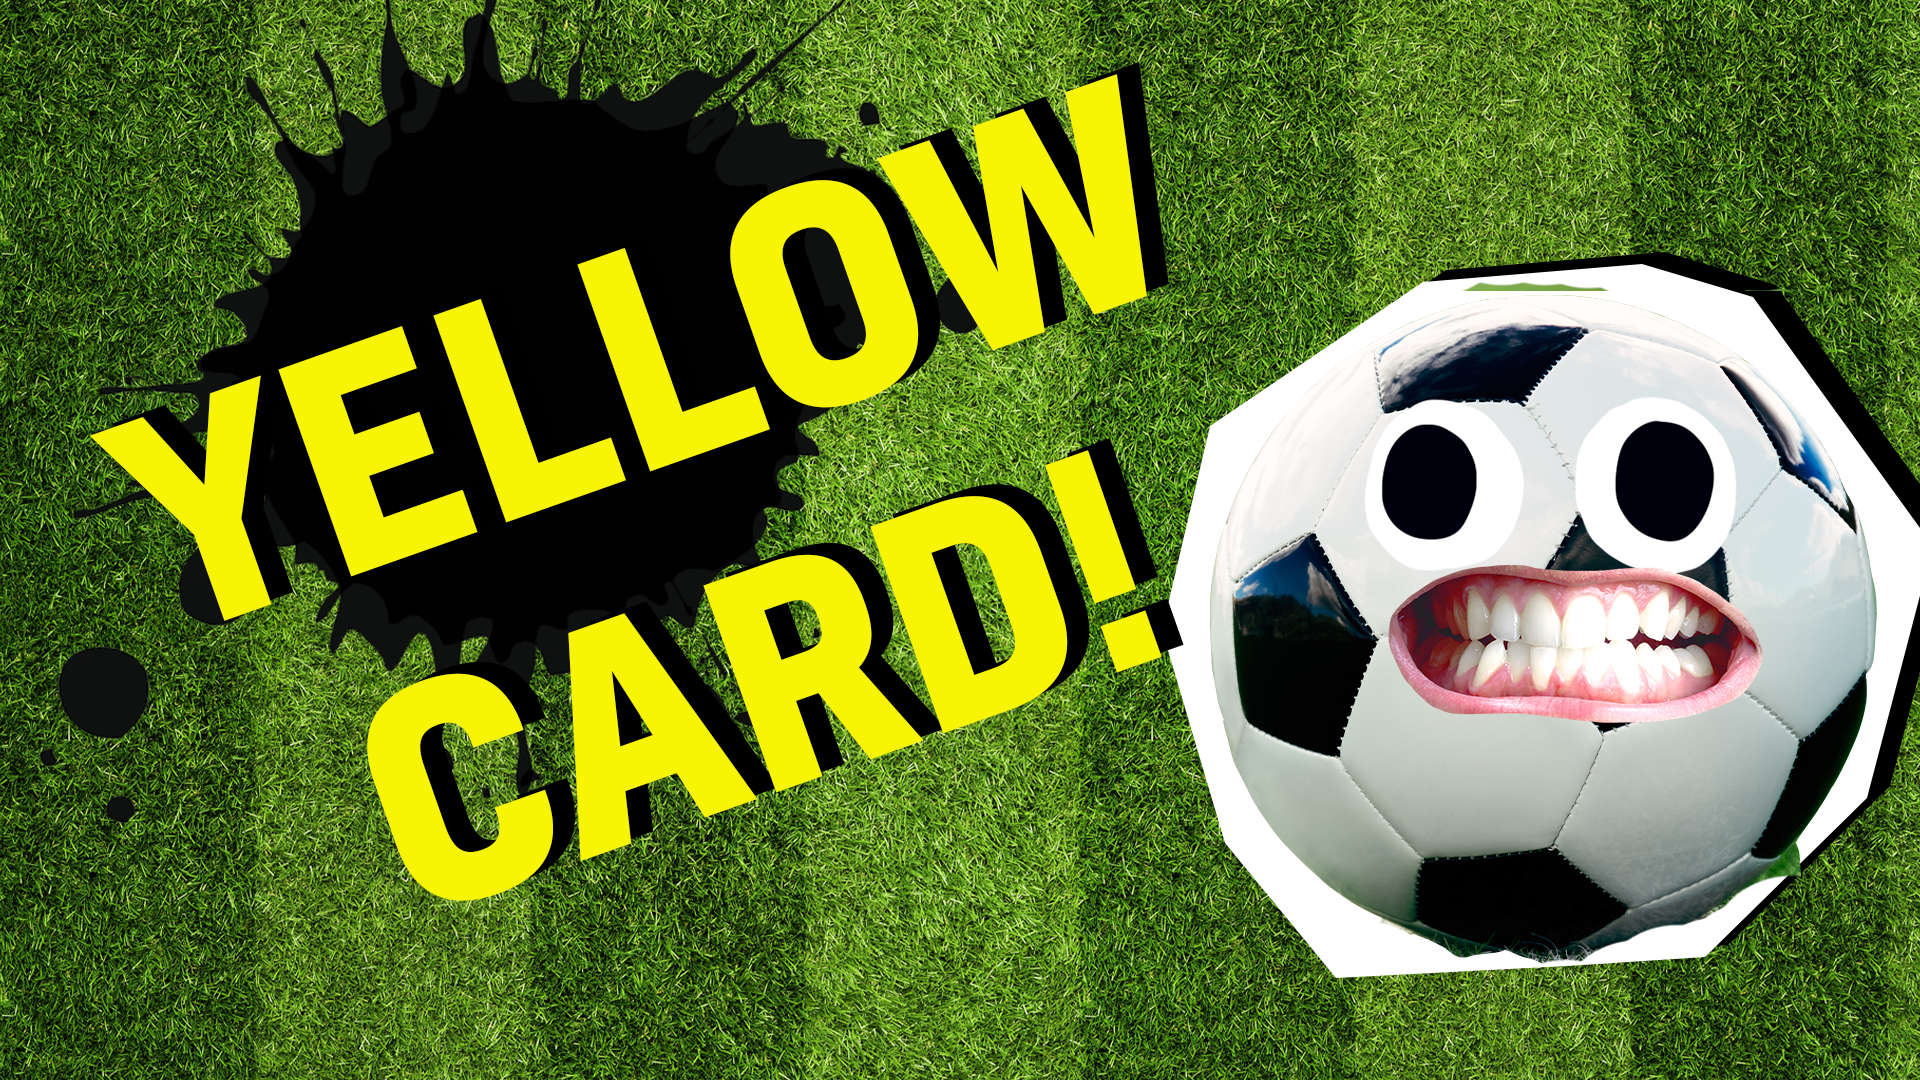 Yellow card result